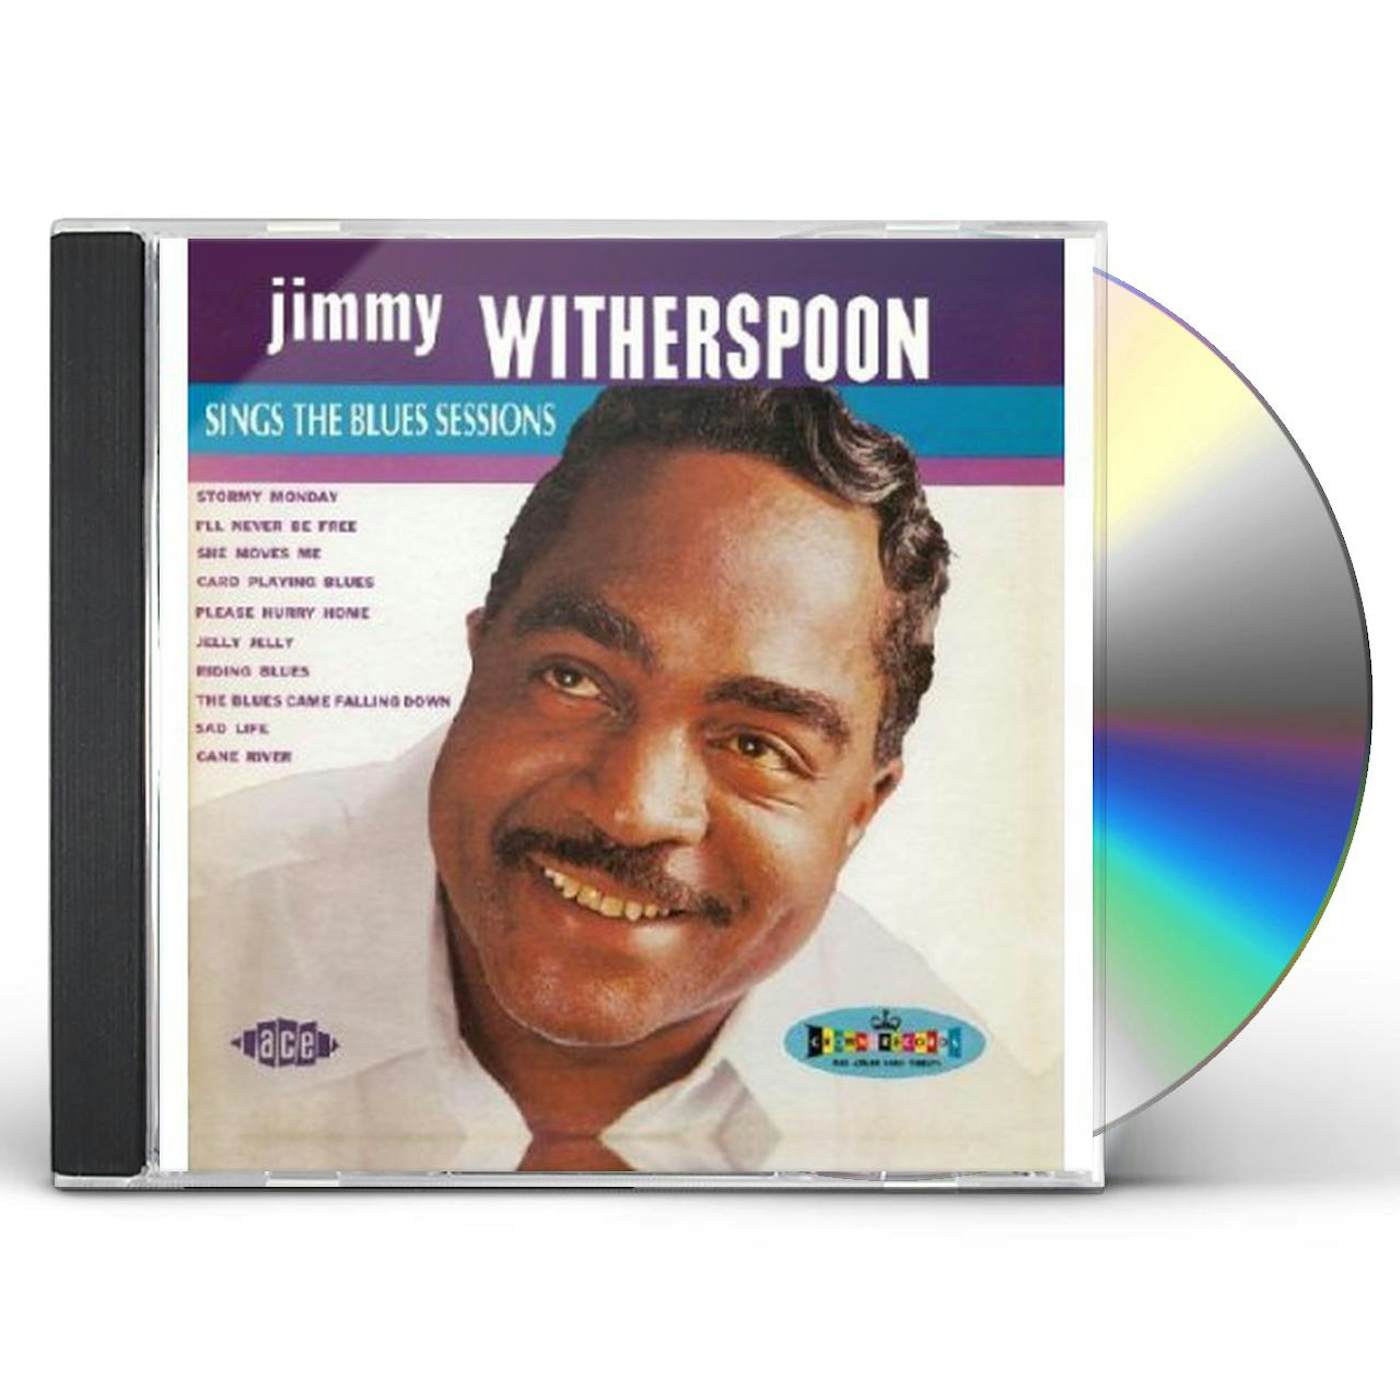 Jimmy Witherspoon SINGS THE BLUES SESSIONS CD